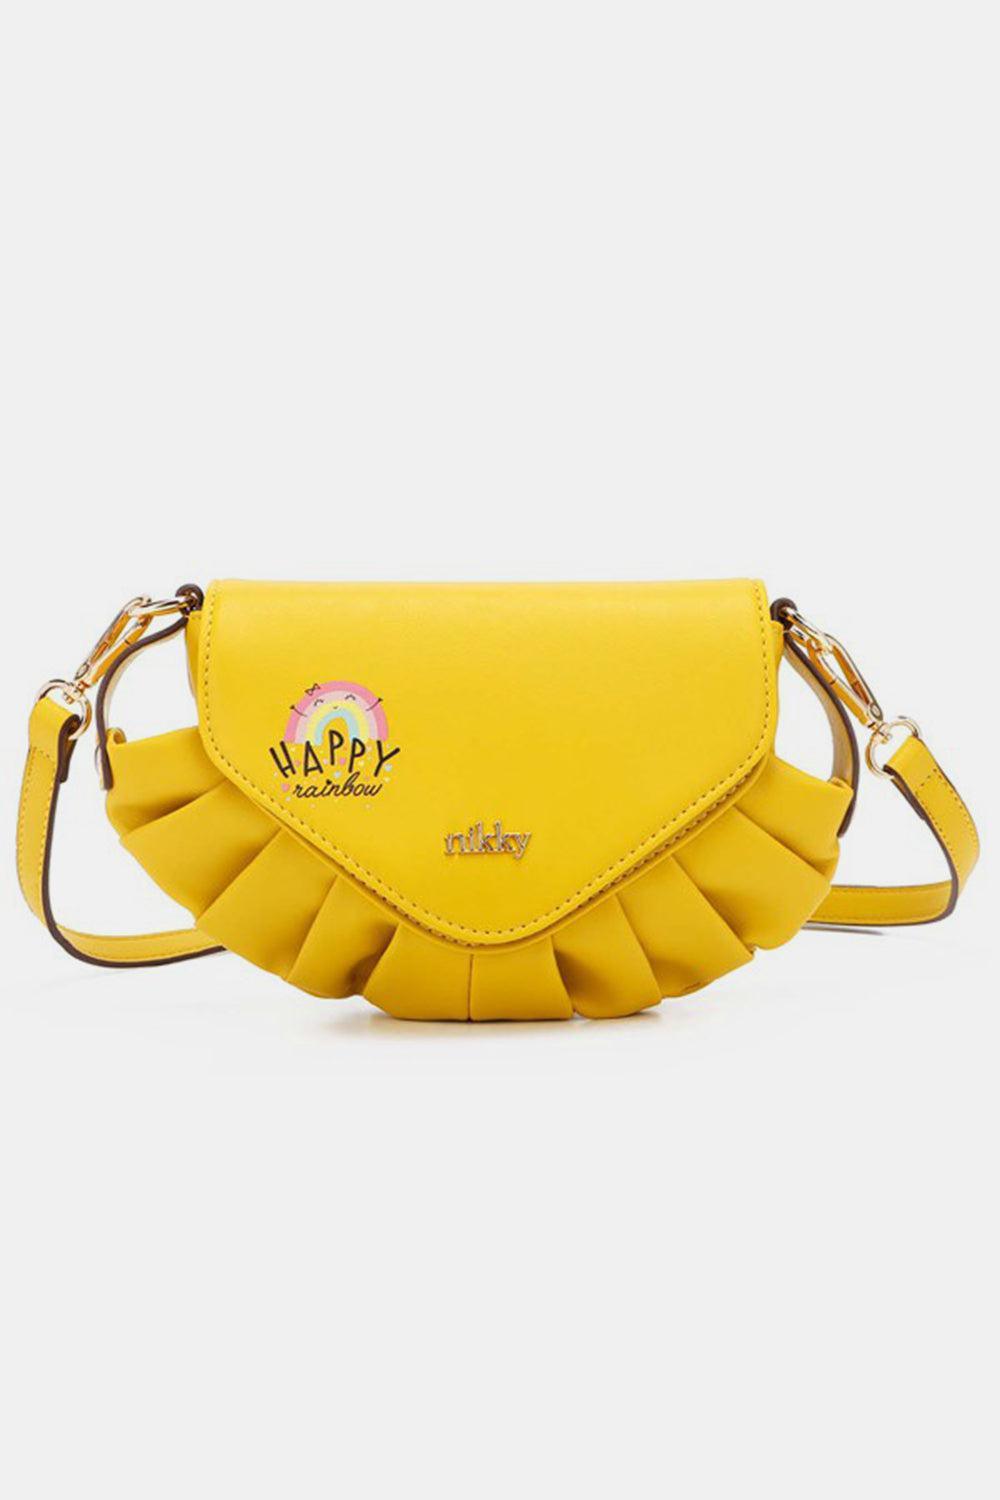 a yellow purse with a tasselled handle